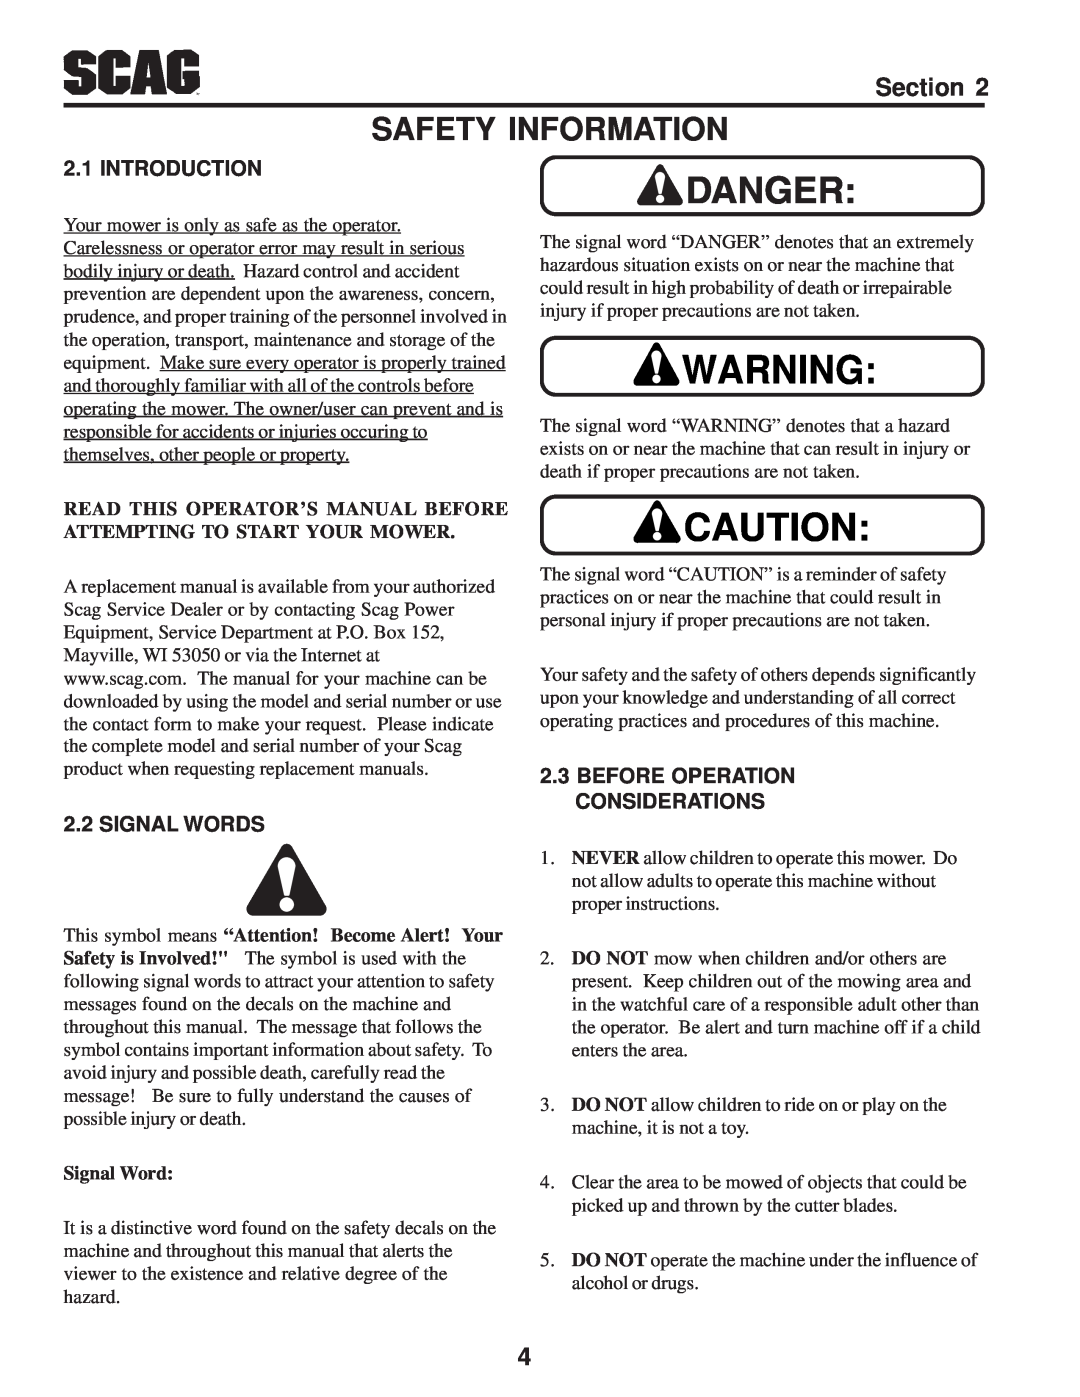 Scag Power Equipment SWZV manual Safety Information, Introduction, Signal Words, Before Operation Considerations 